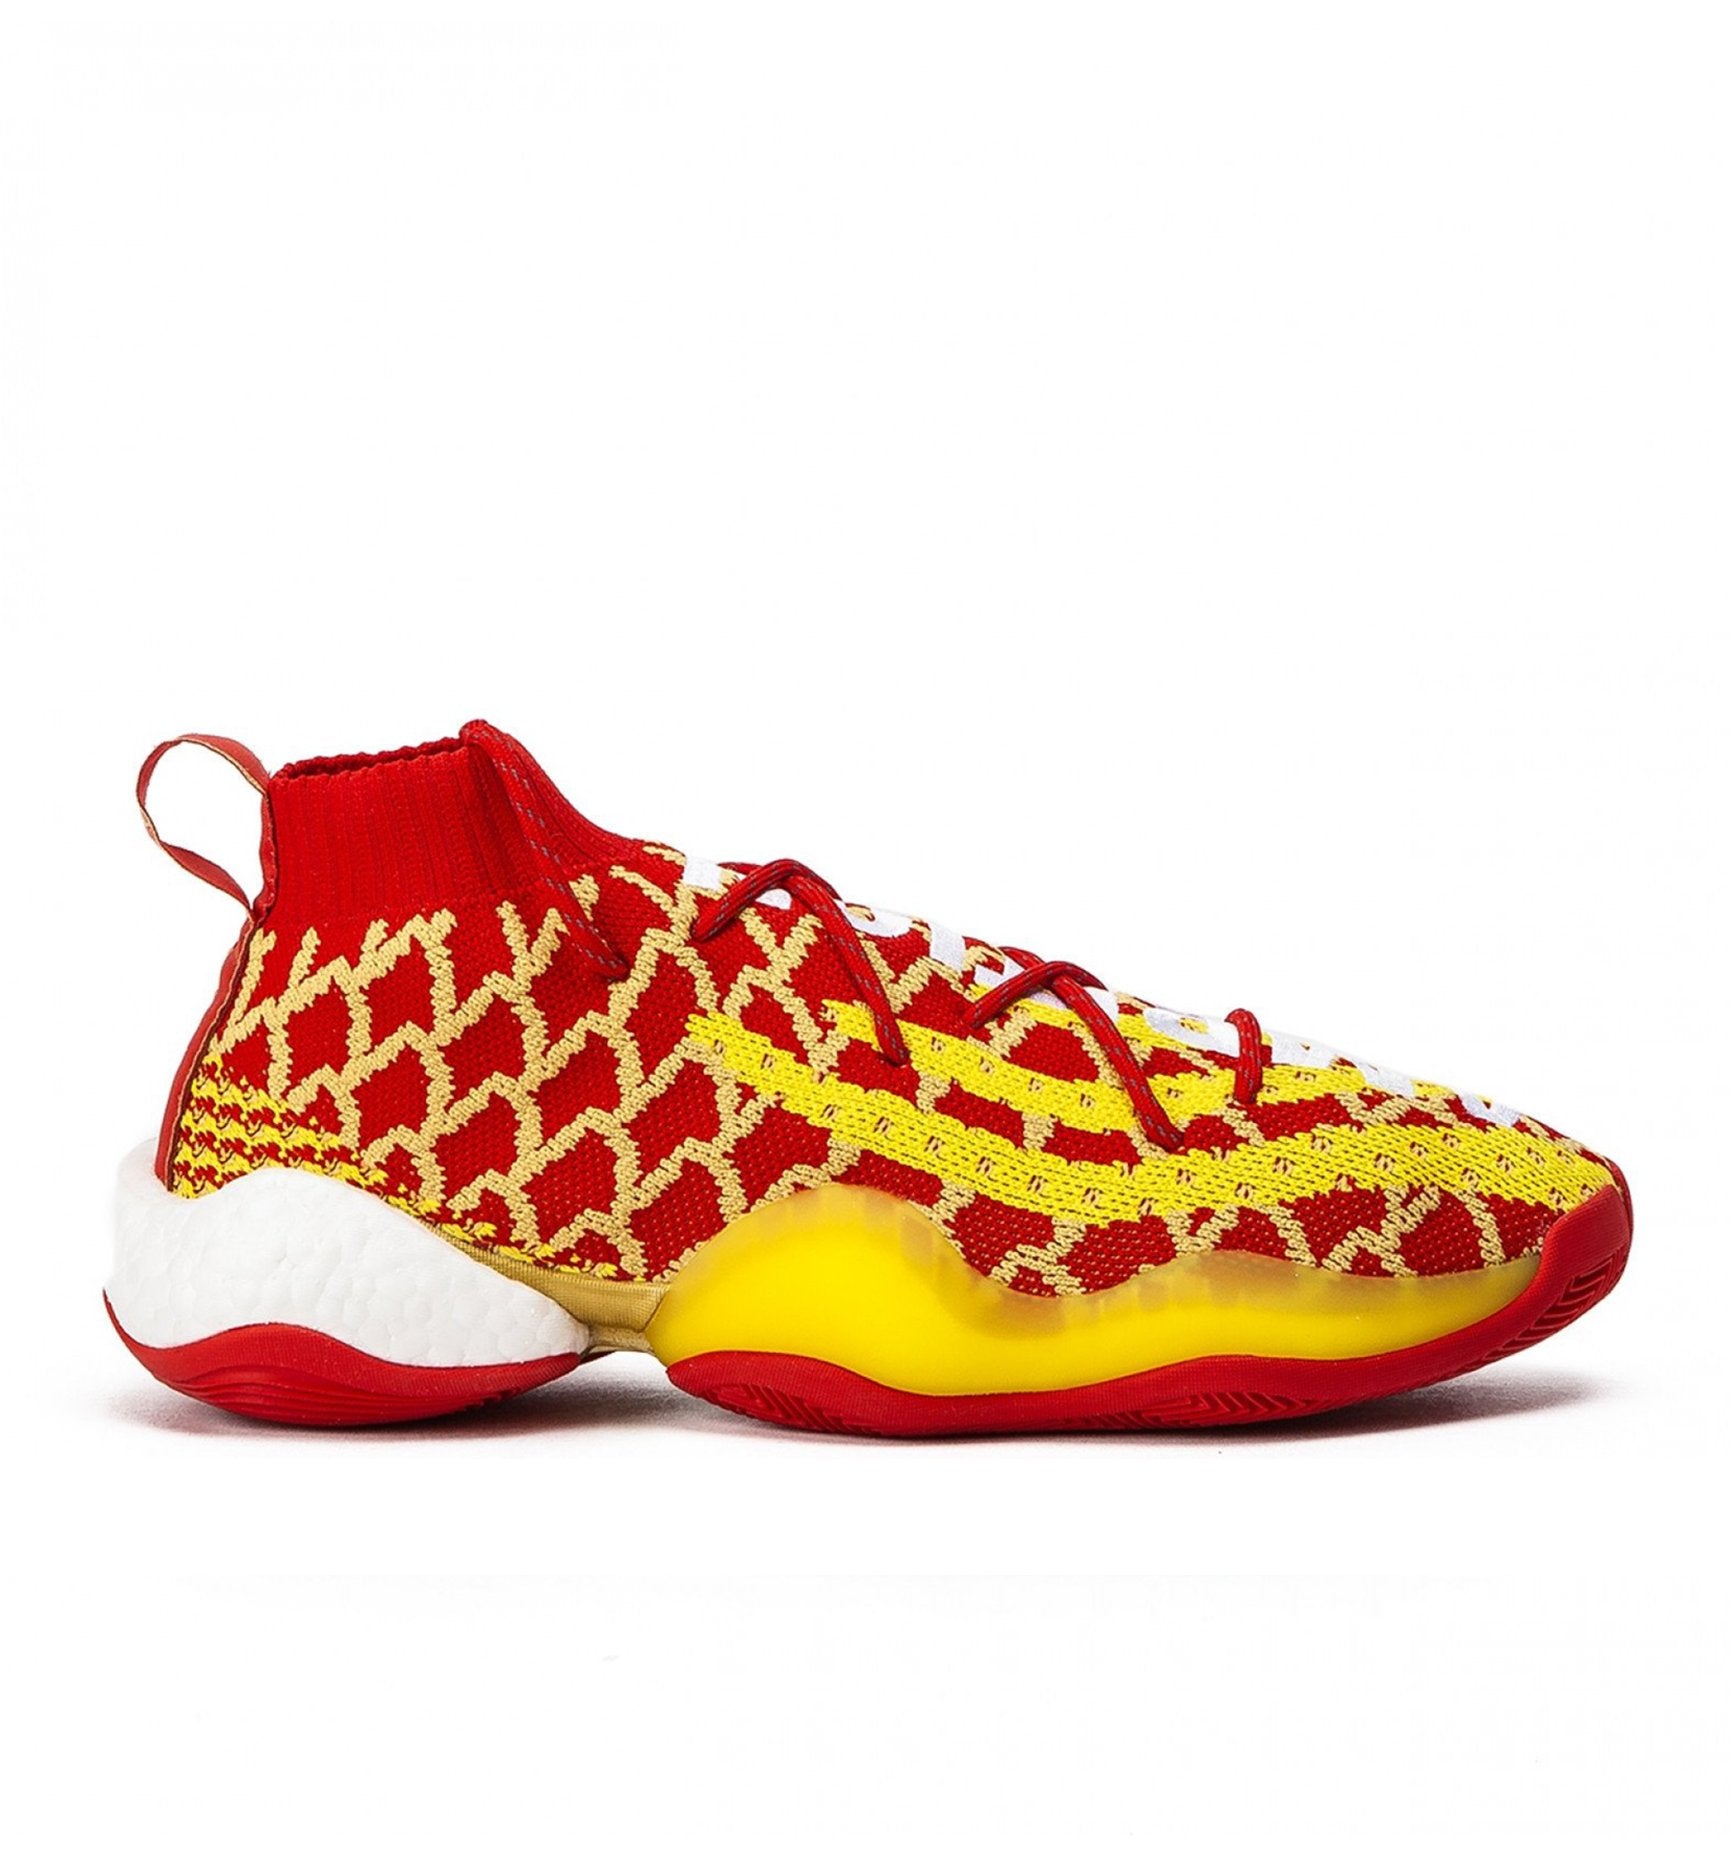 chinese new year crazy byw